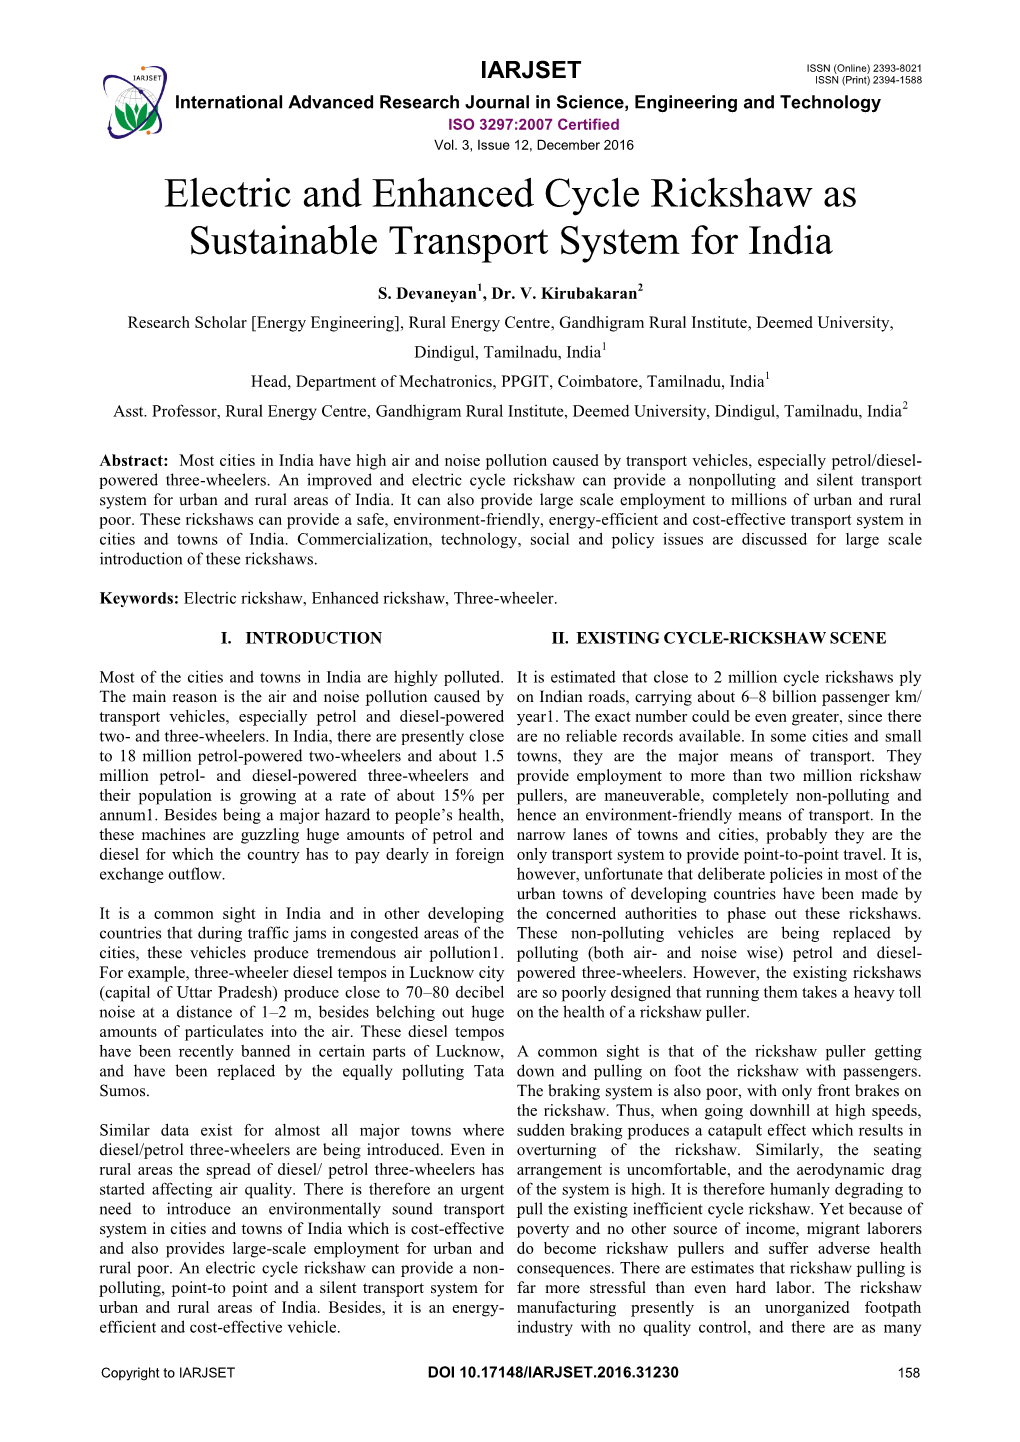 Electric and Enhanced Cycle Rickshaw As Sustainable Transport System for India